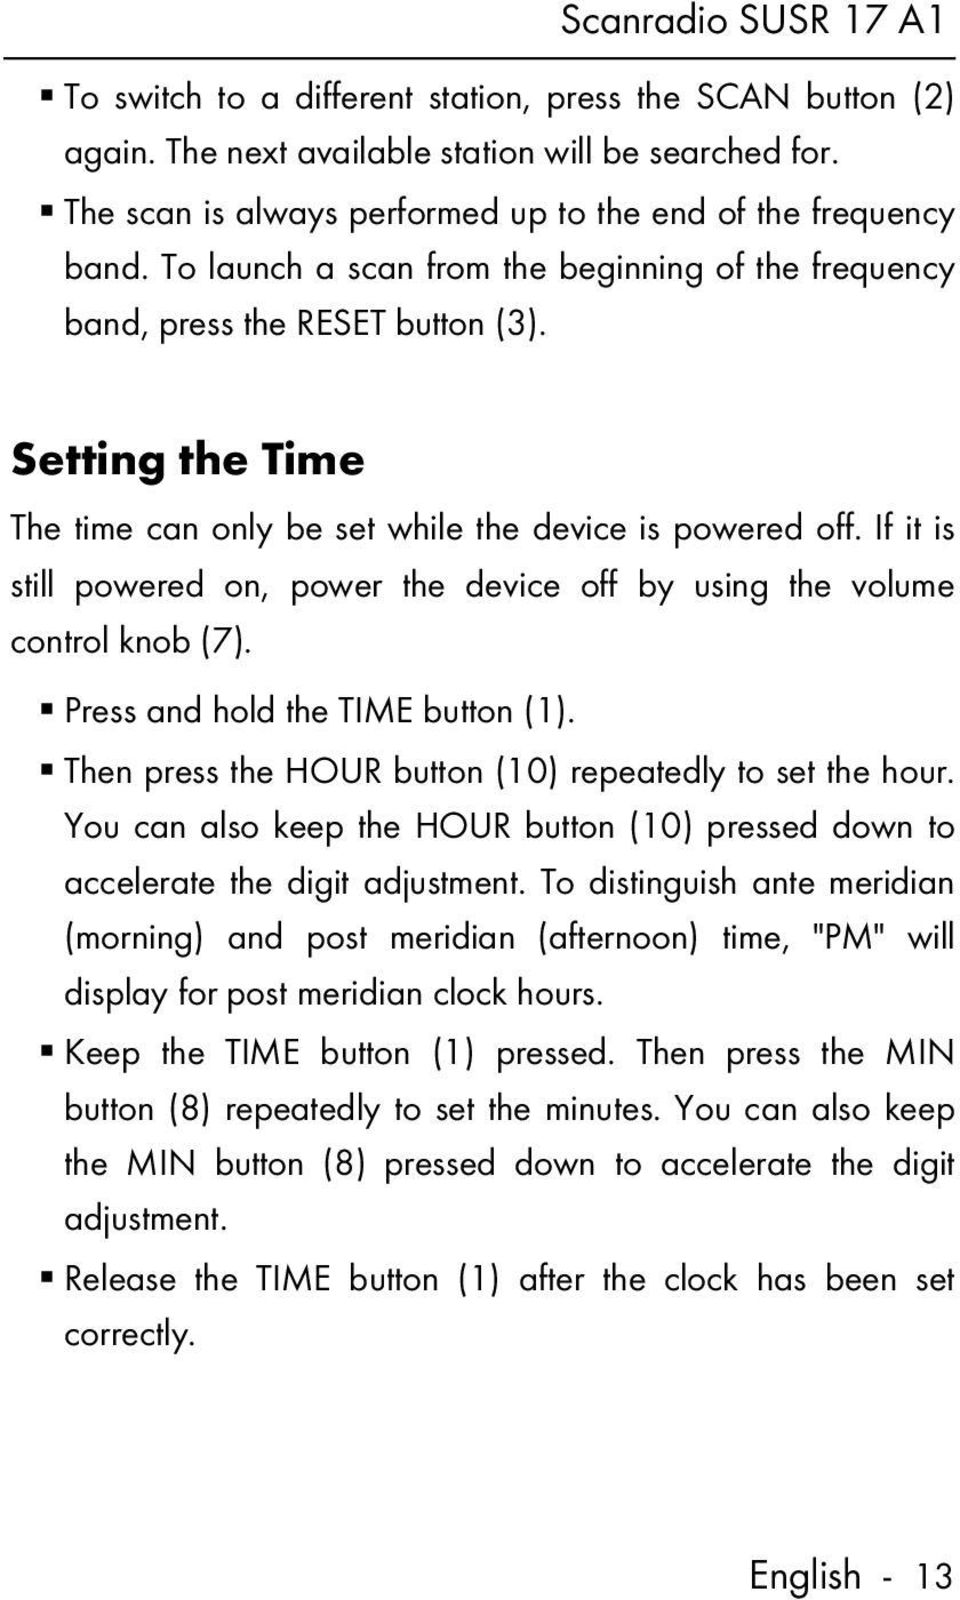 If it is still powered on, power the device off by using the volume control knob (7). Press and hold the TIME button (1). Then press the HOUR button (10) repeatedly to set the hour.